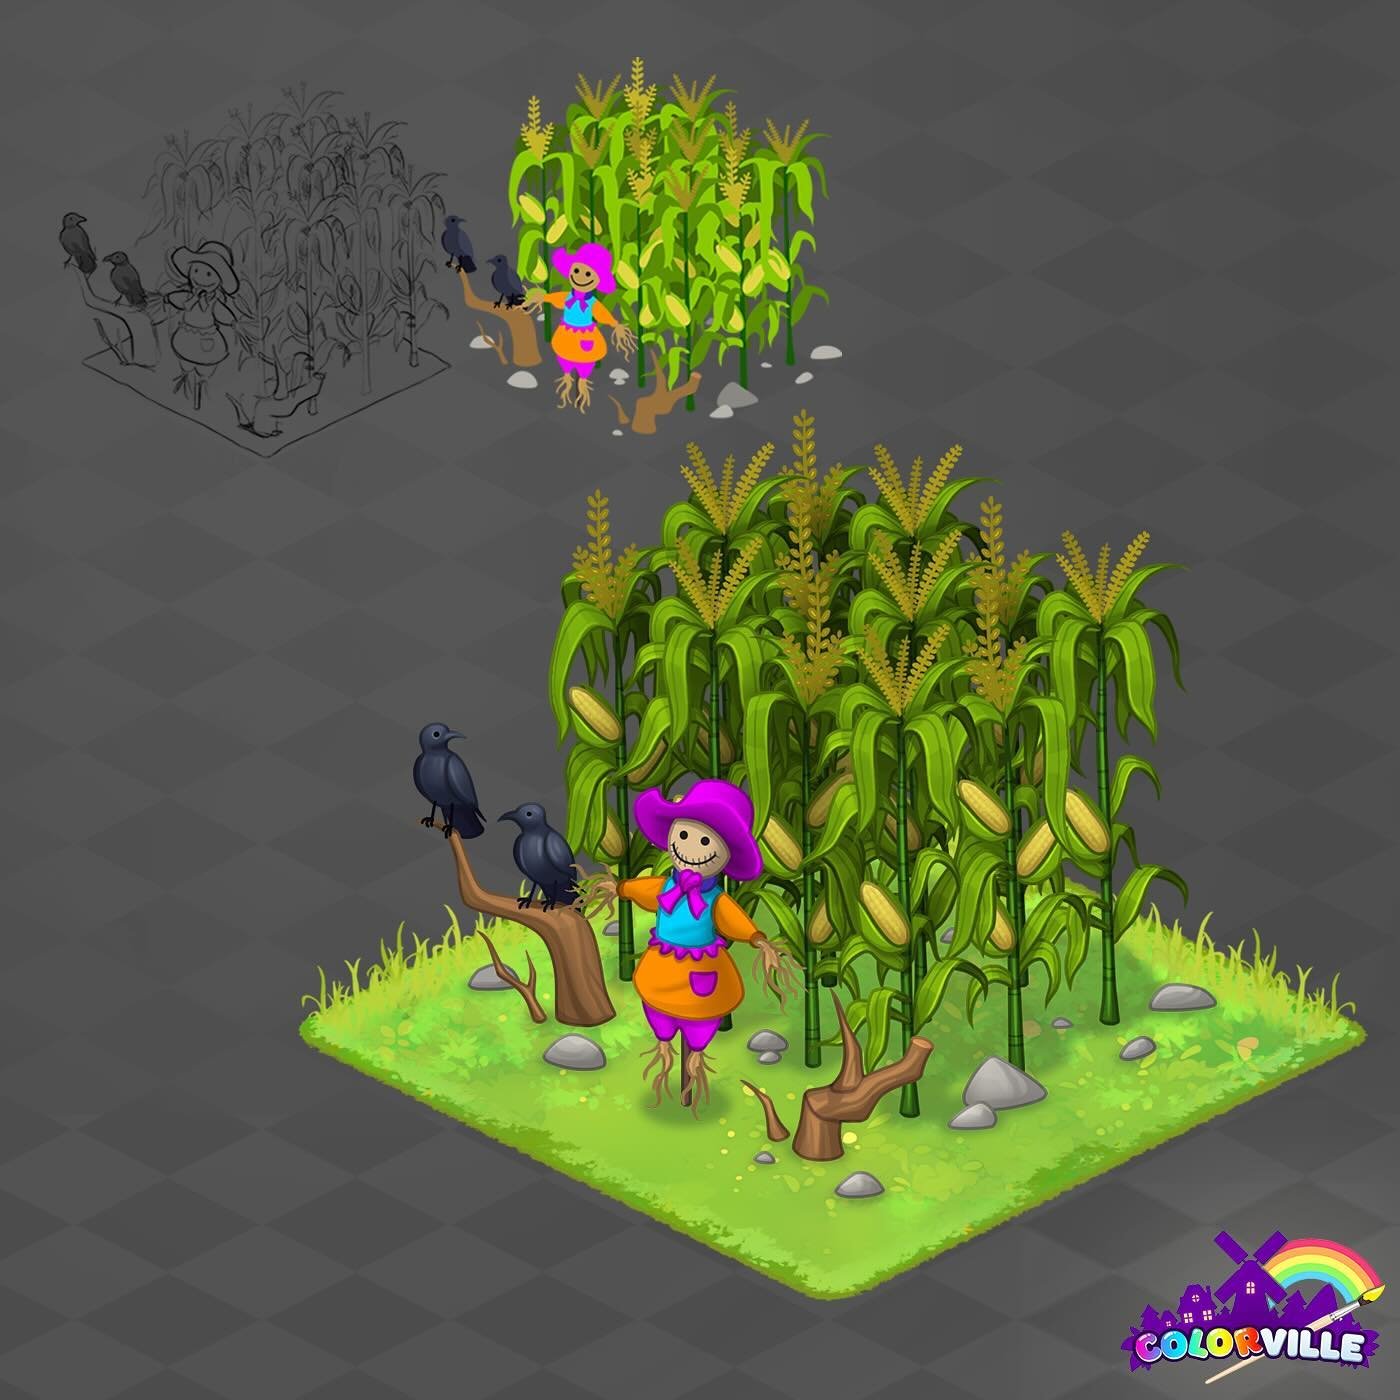 Scarecrow, 4x4 item for &lsquo;Colorville&rsquo; 🎨
Each asset had a rendered version + a vector version (&lsquo;color by number&rsquo;) so the player could change the palette of each one!
.
#isometricart #gameart #2dart #mobilegame #cozygame